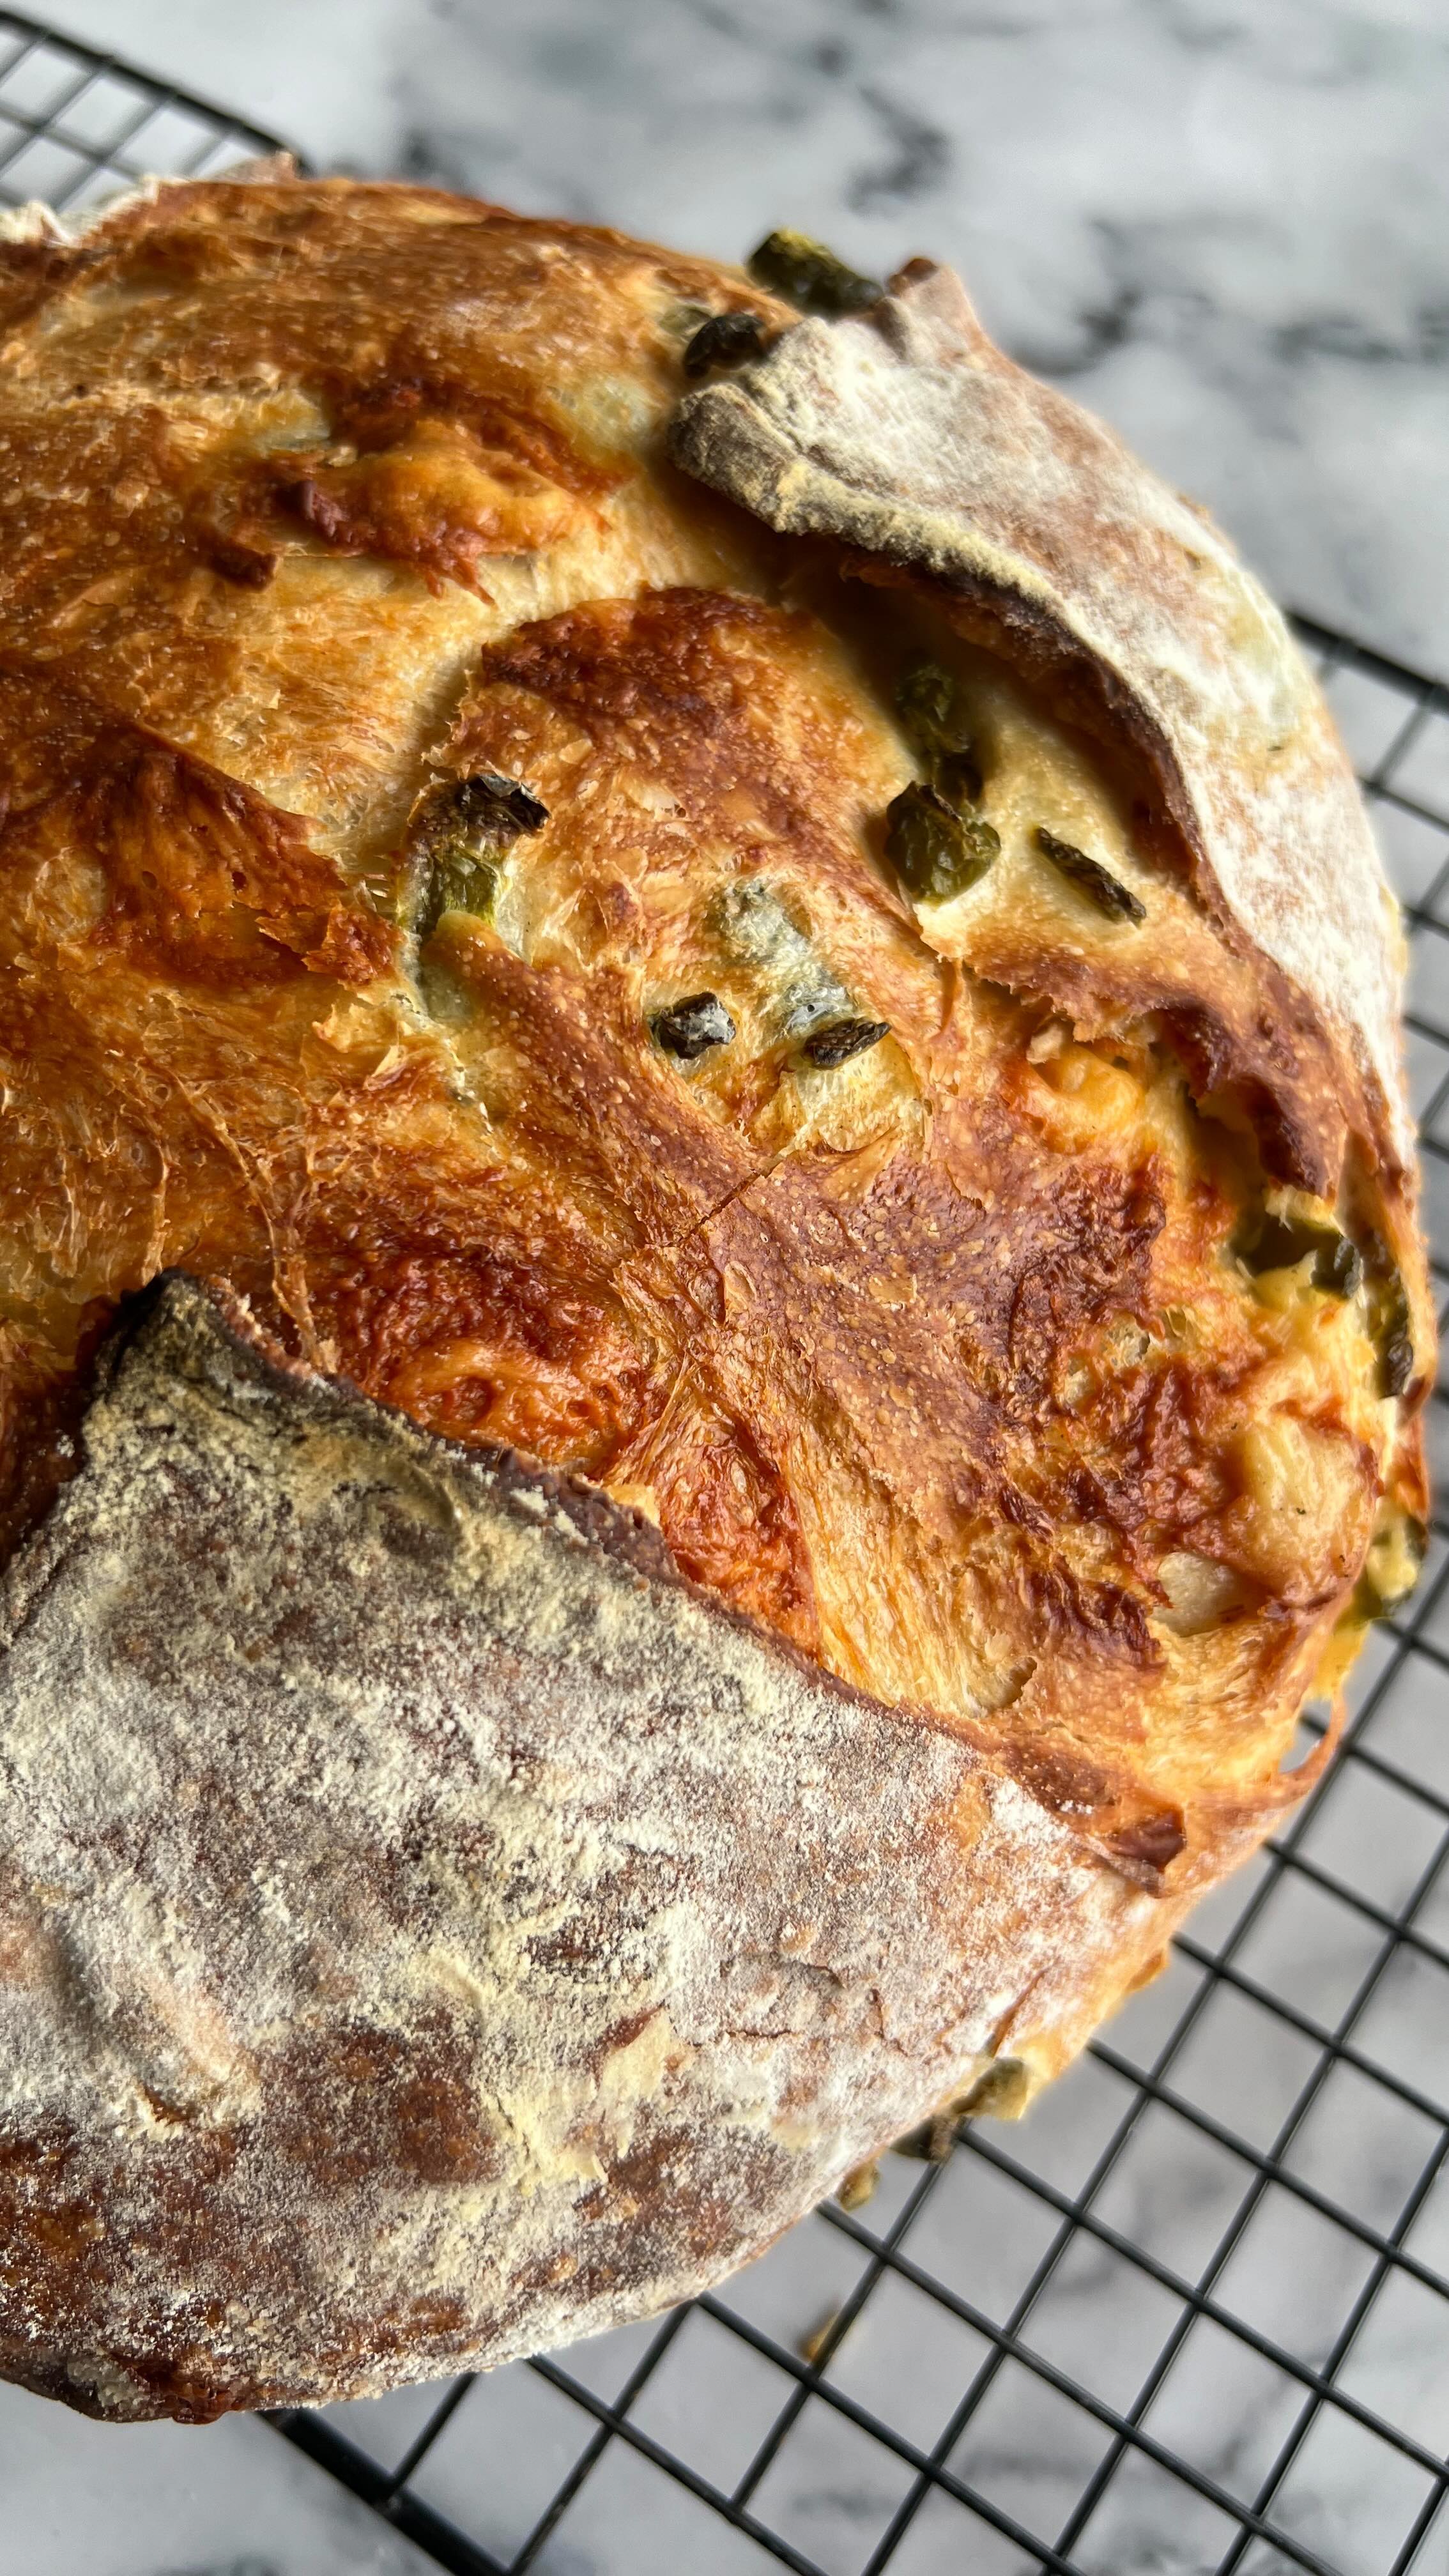 Comment RECIPE LINKS if you’d like the link for this Jalapeño Cheddar Bread recipe sent direct to your inbox!

More deta